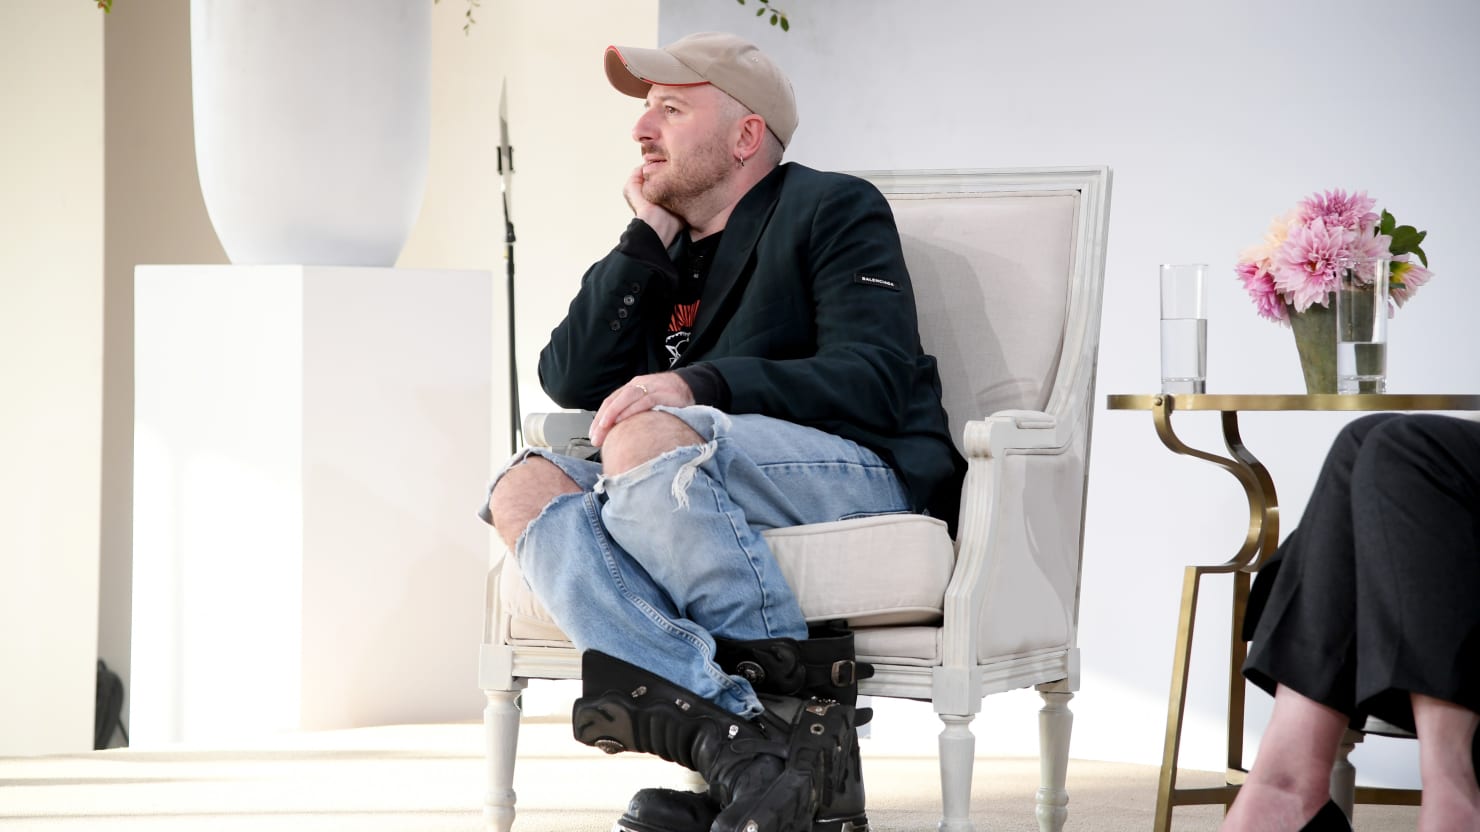 What did creative director Demna Gvasalia say about the child ad photo?  Balenciaga partners with children's non-profit